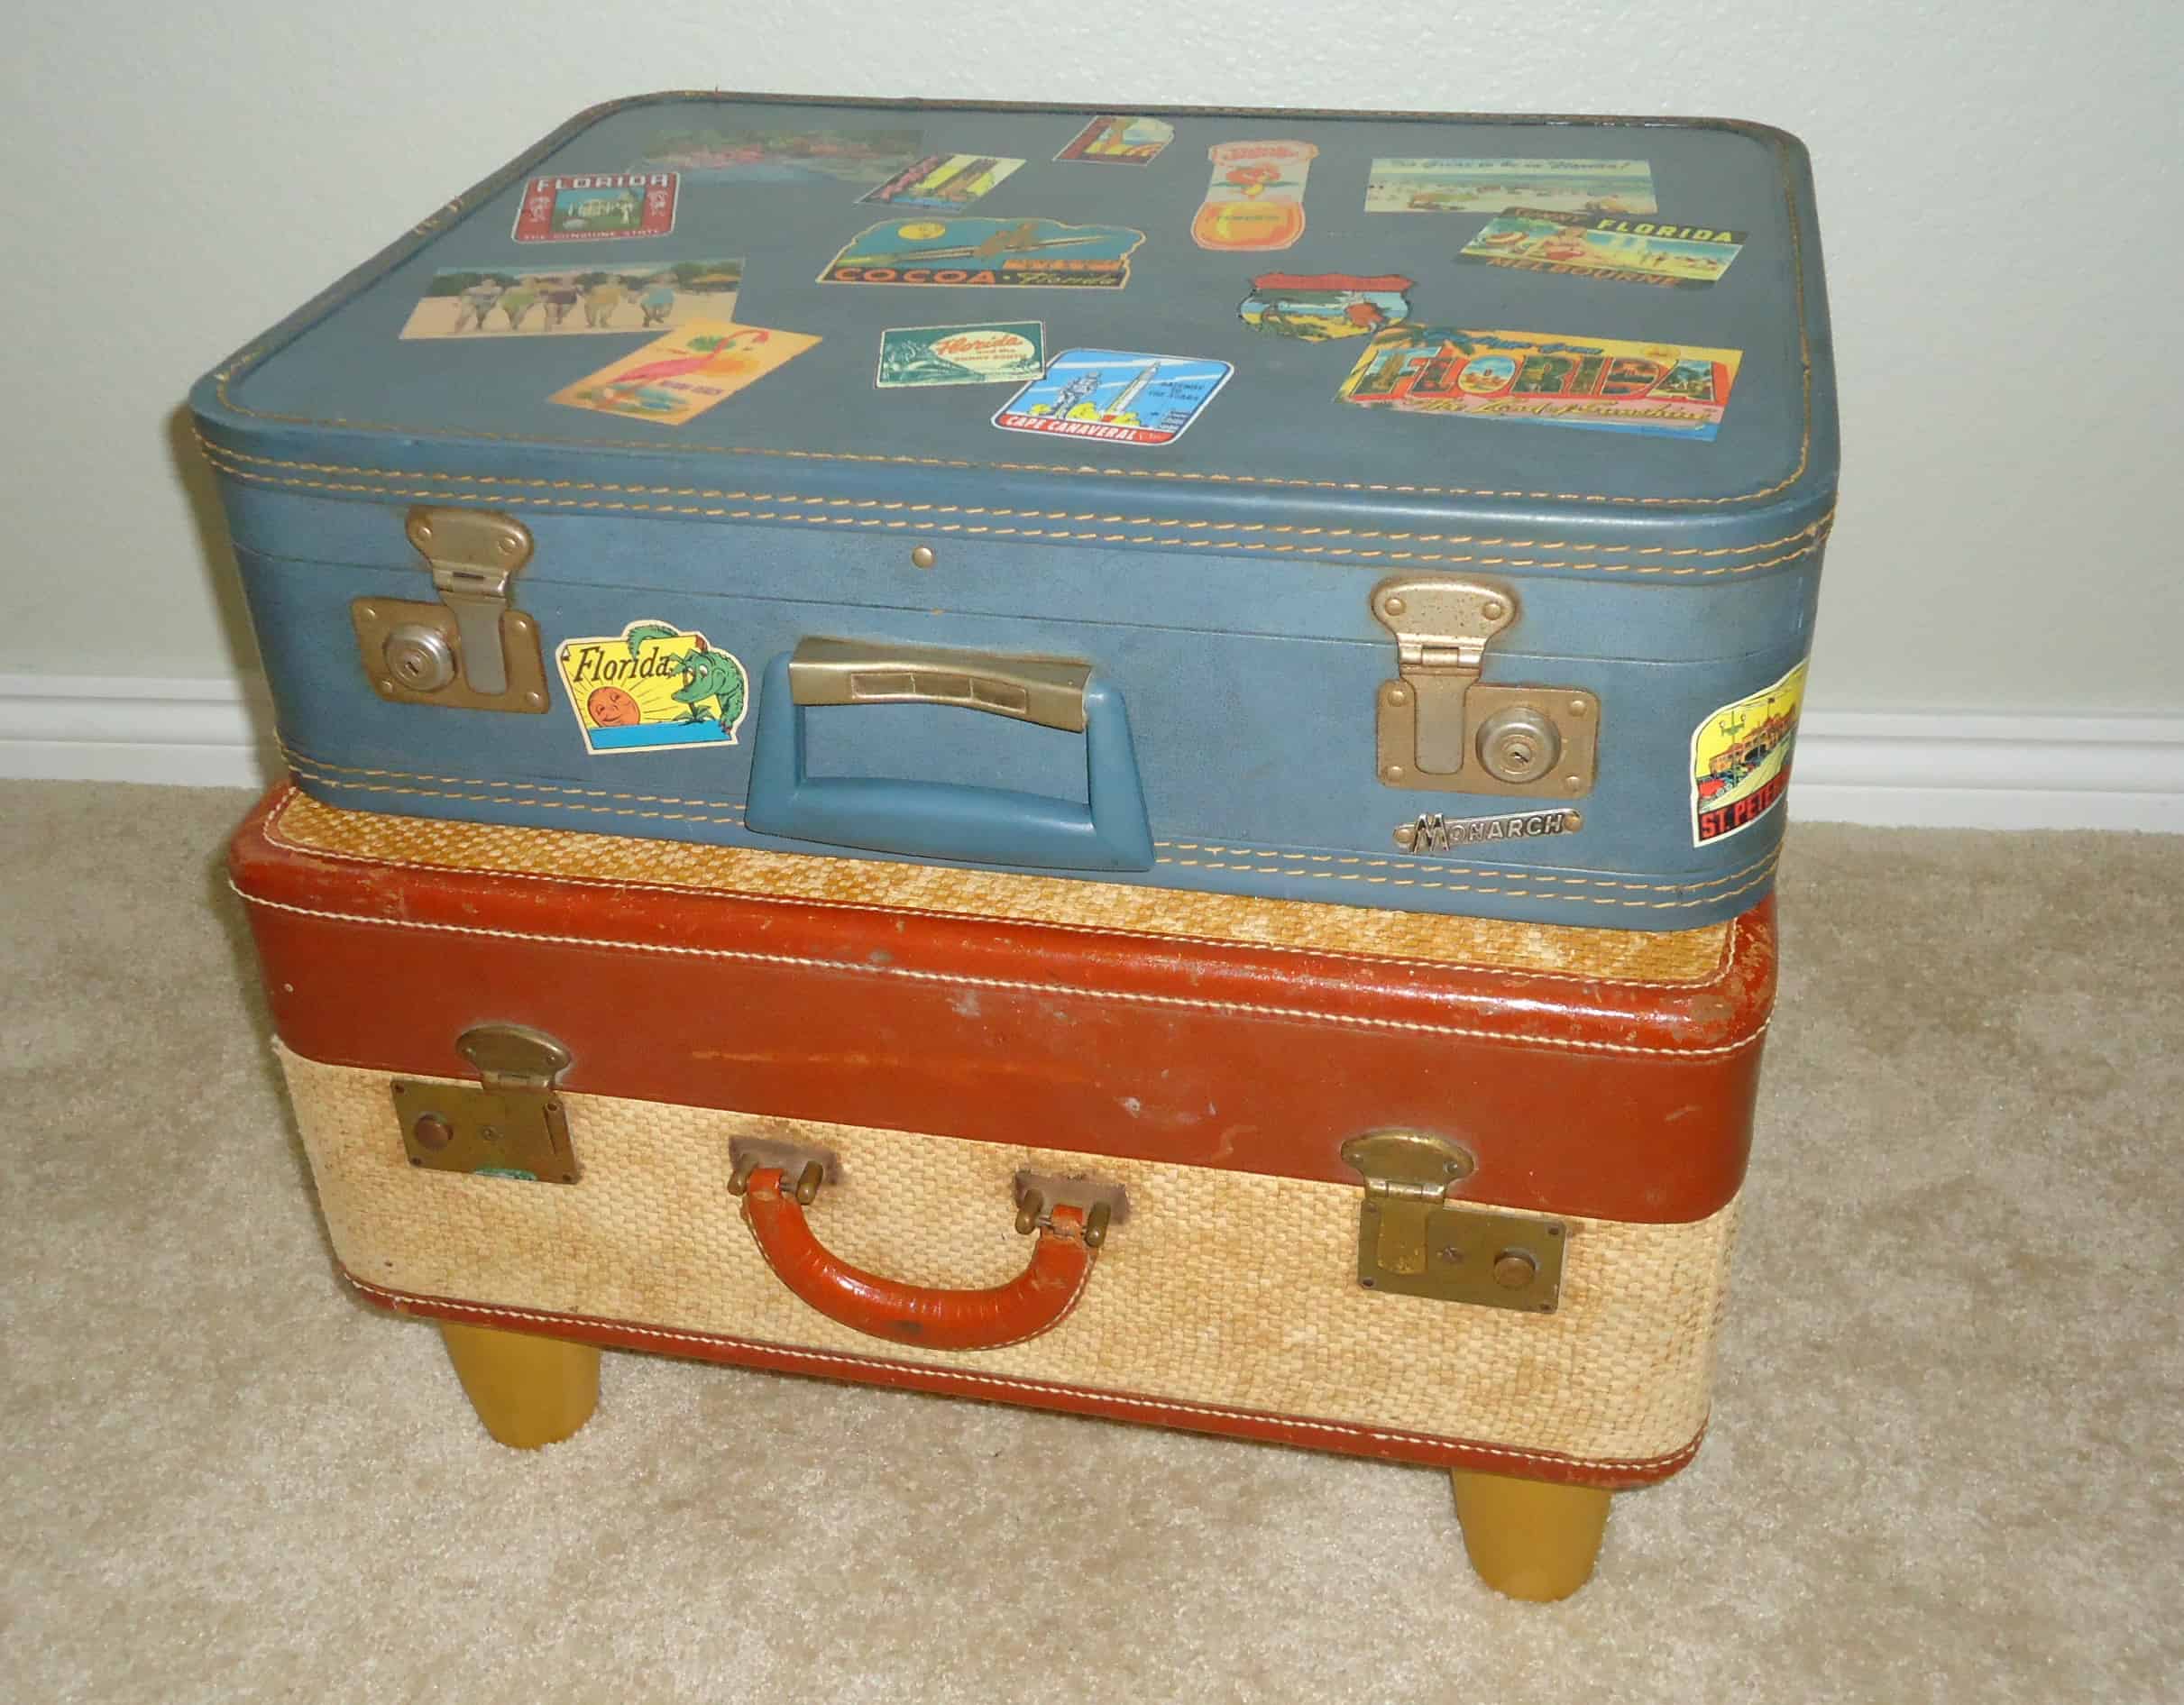 Stacked suitcase nightstand